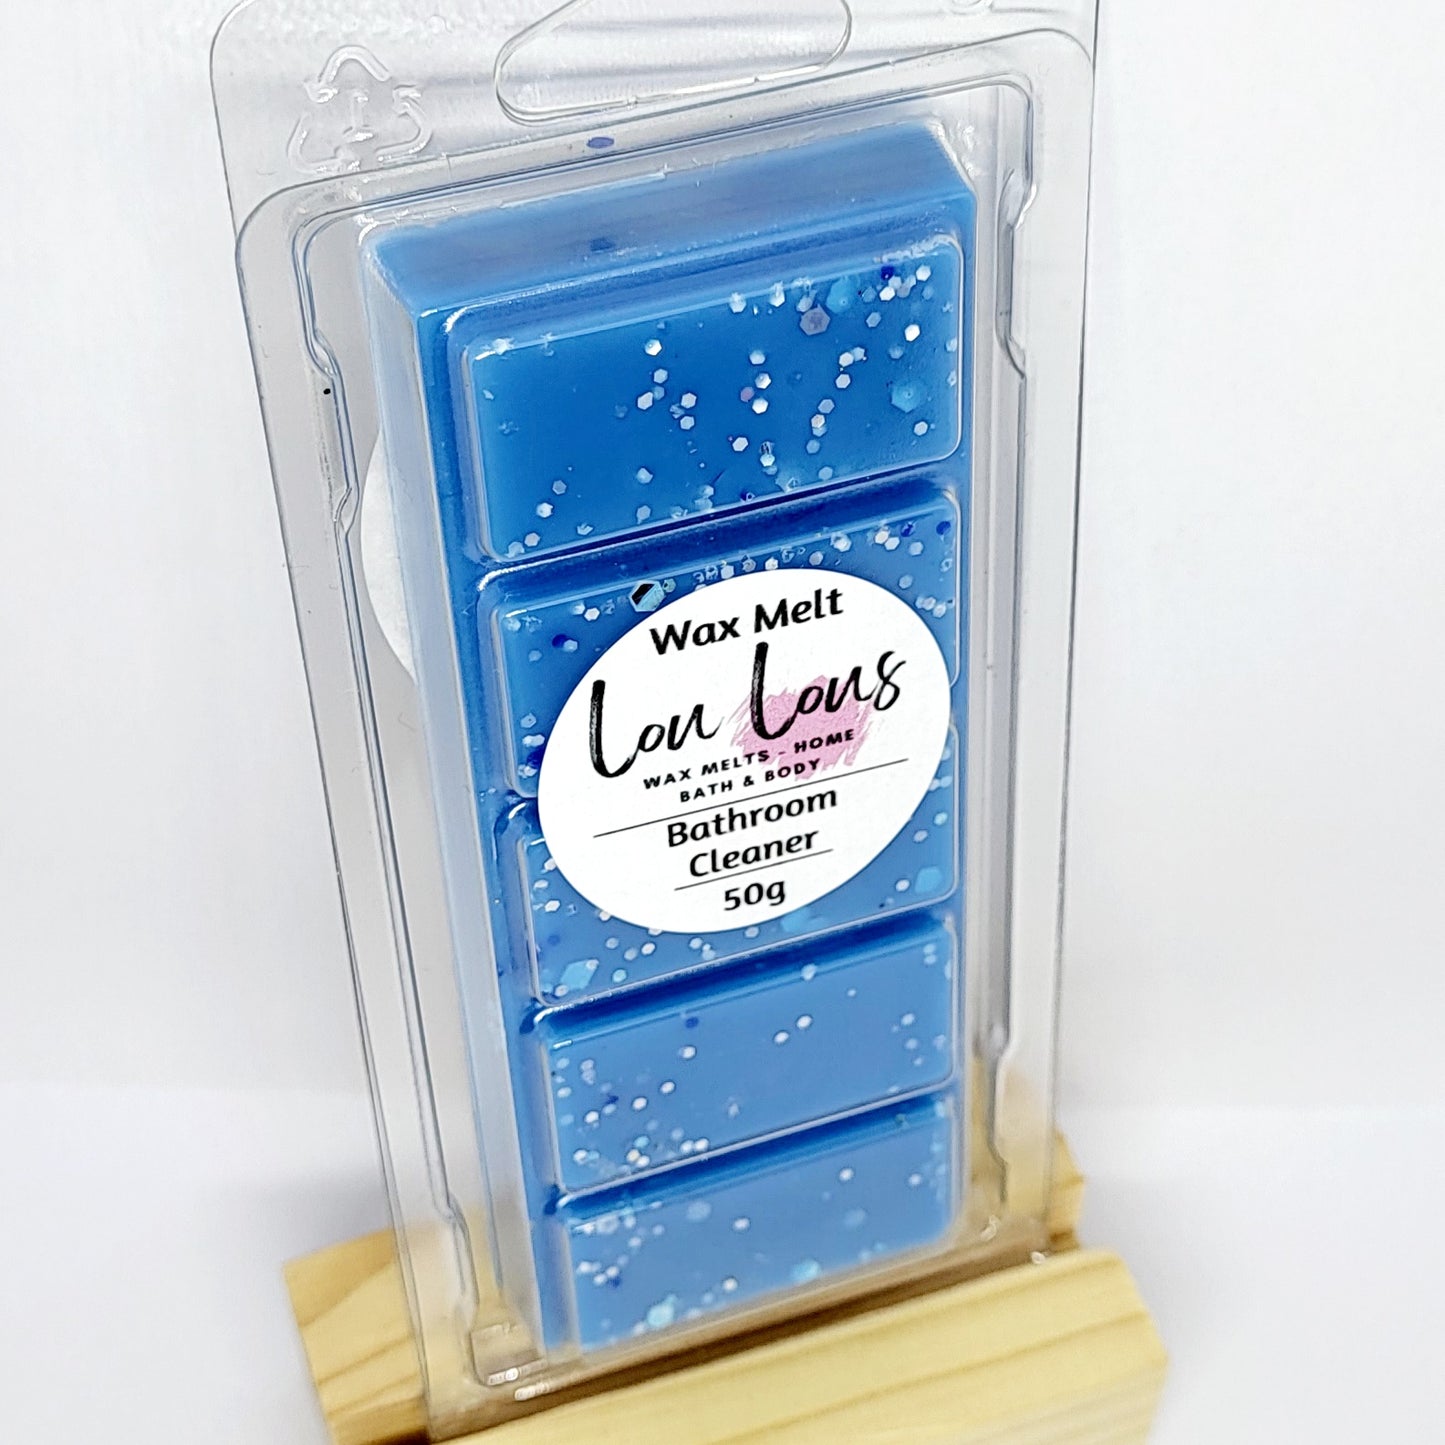 Wax melt snap bar scented in bathroom cleaner